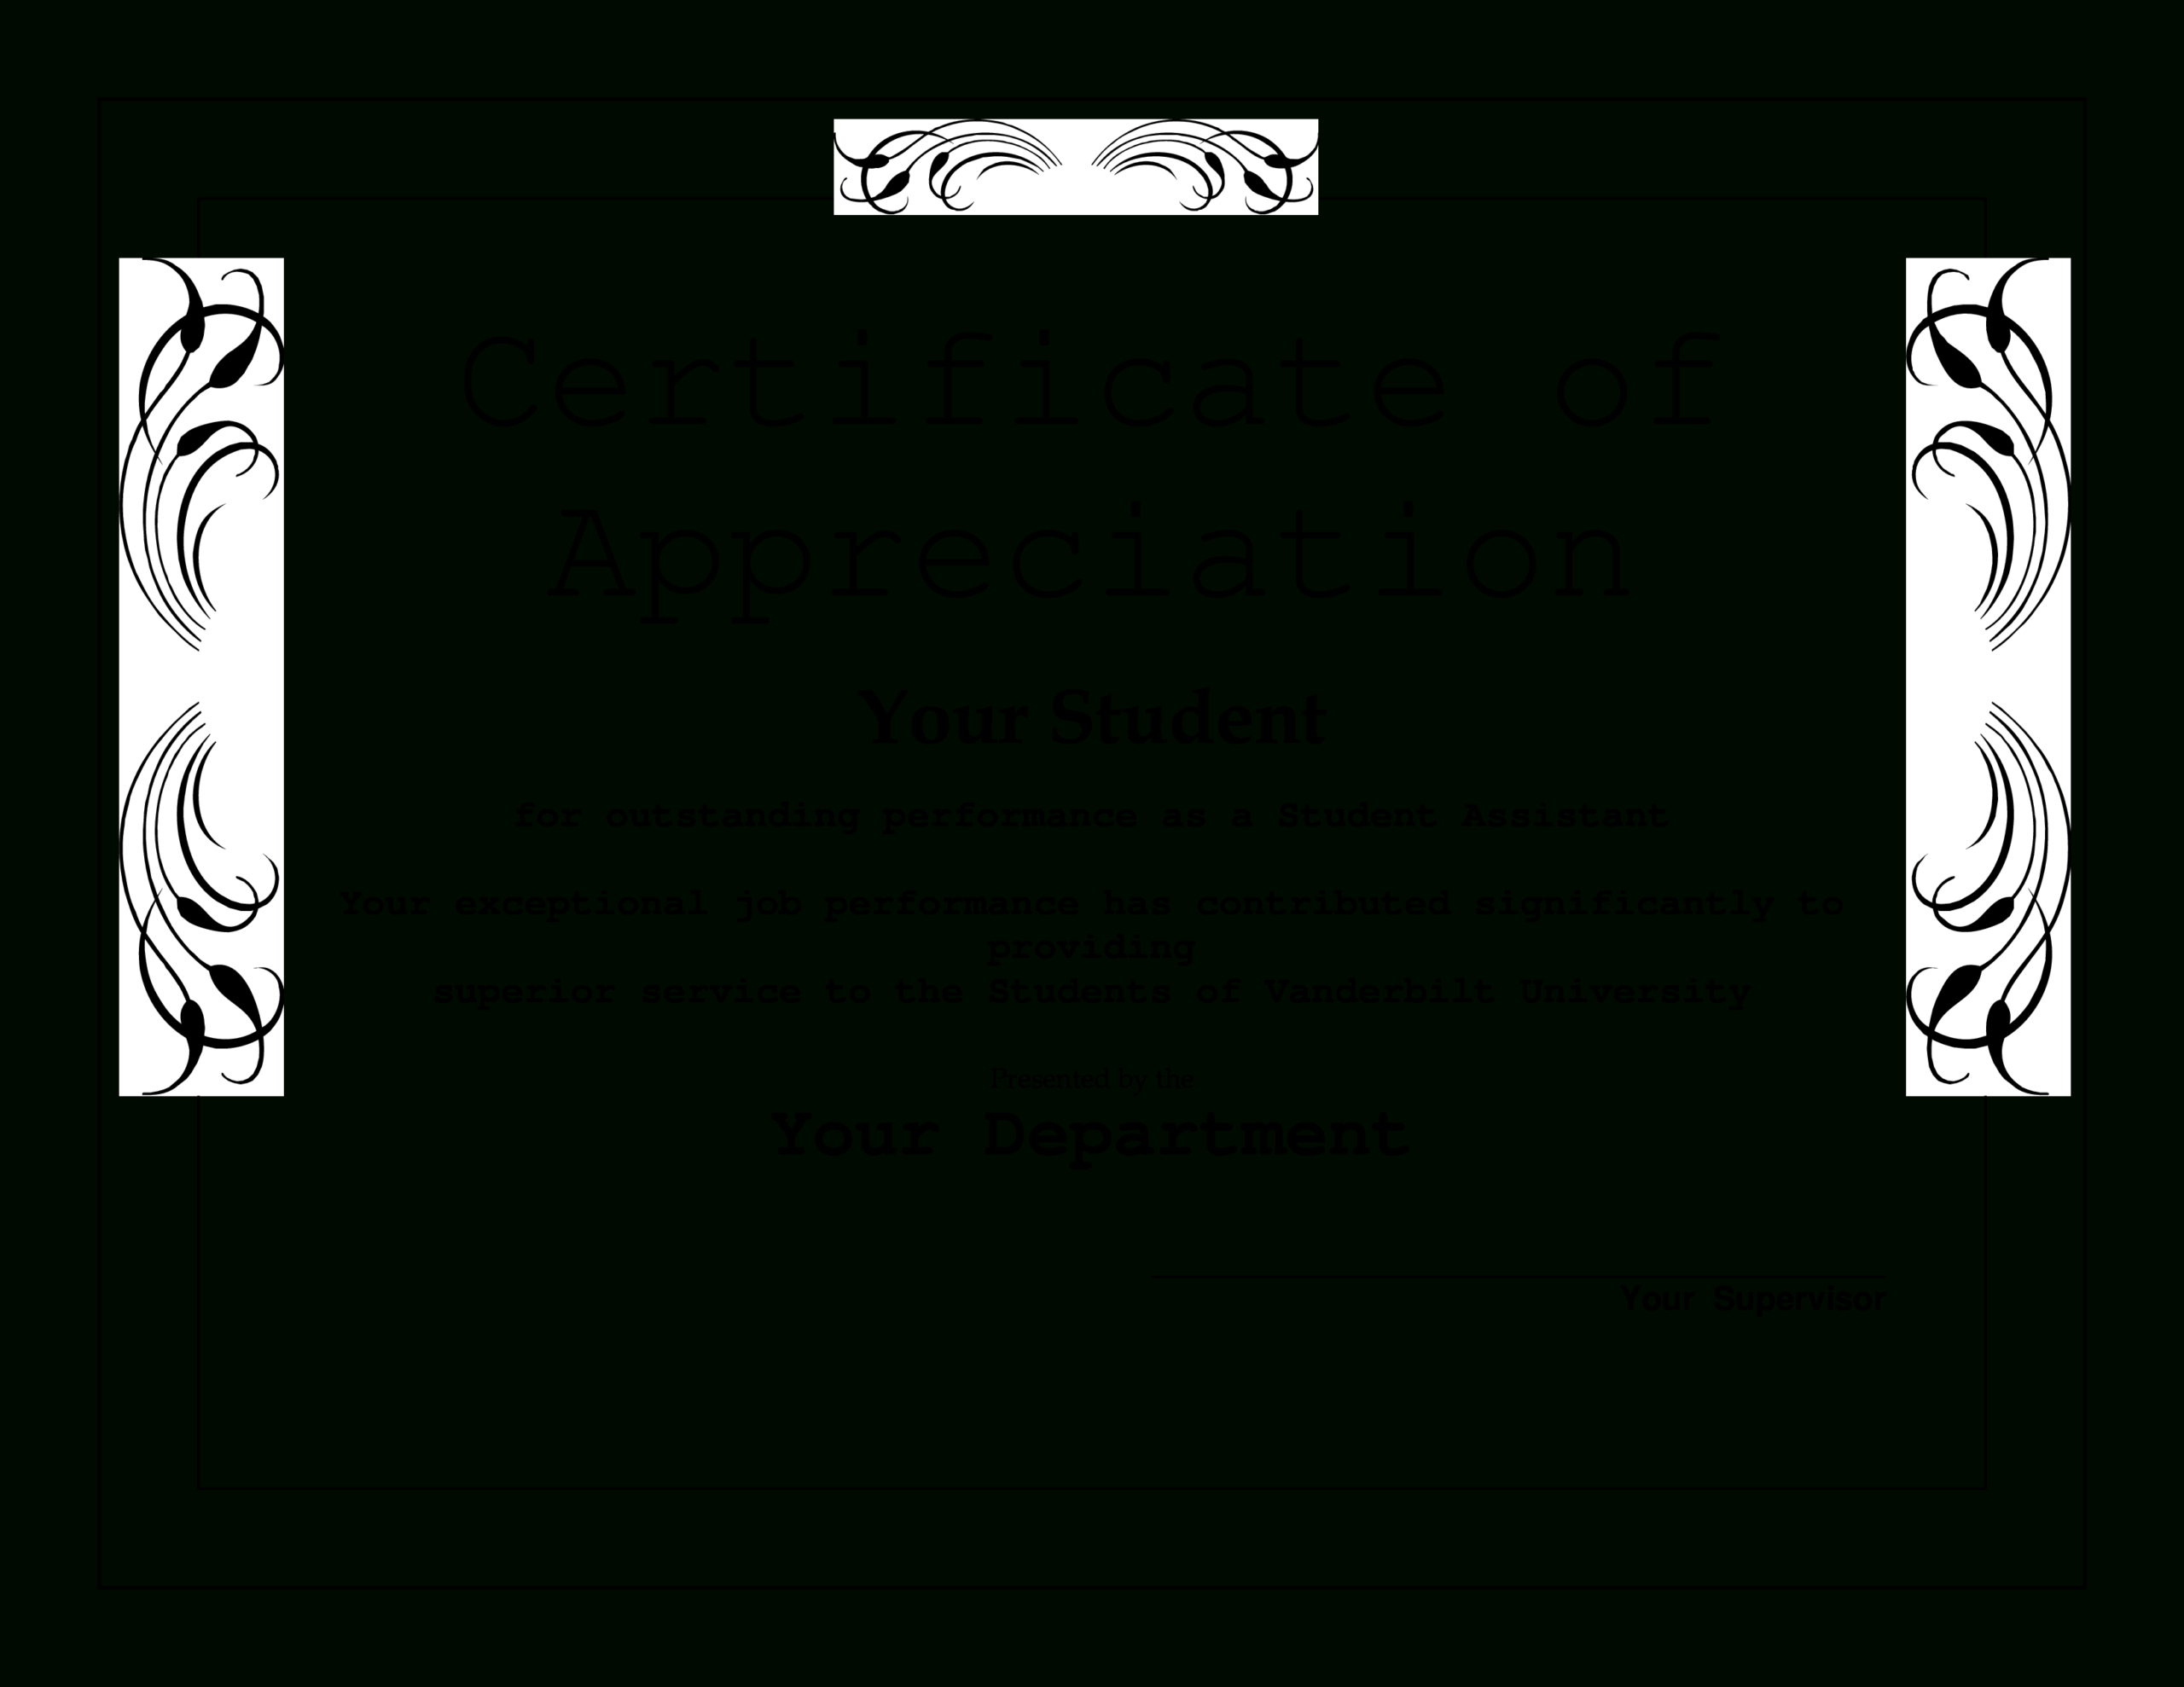 Student Appreciation Award | Templates At Within Student Of The Year Award Certificate Templates